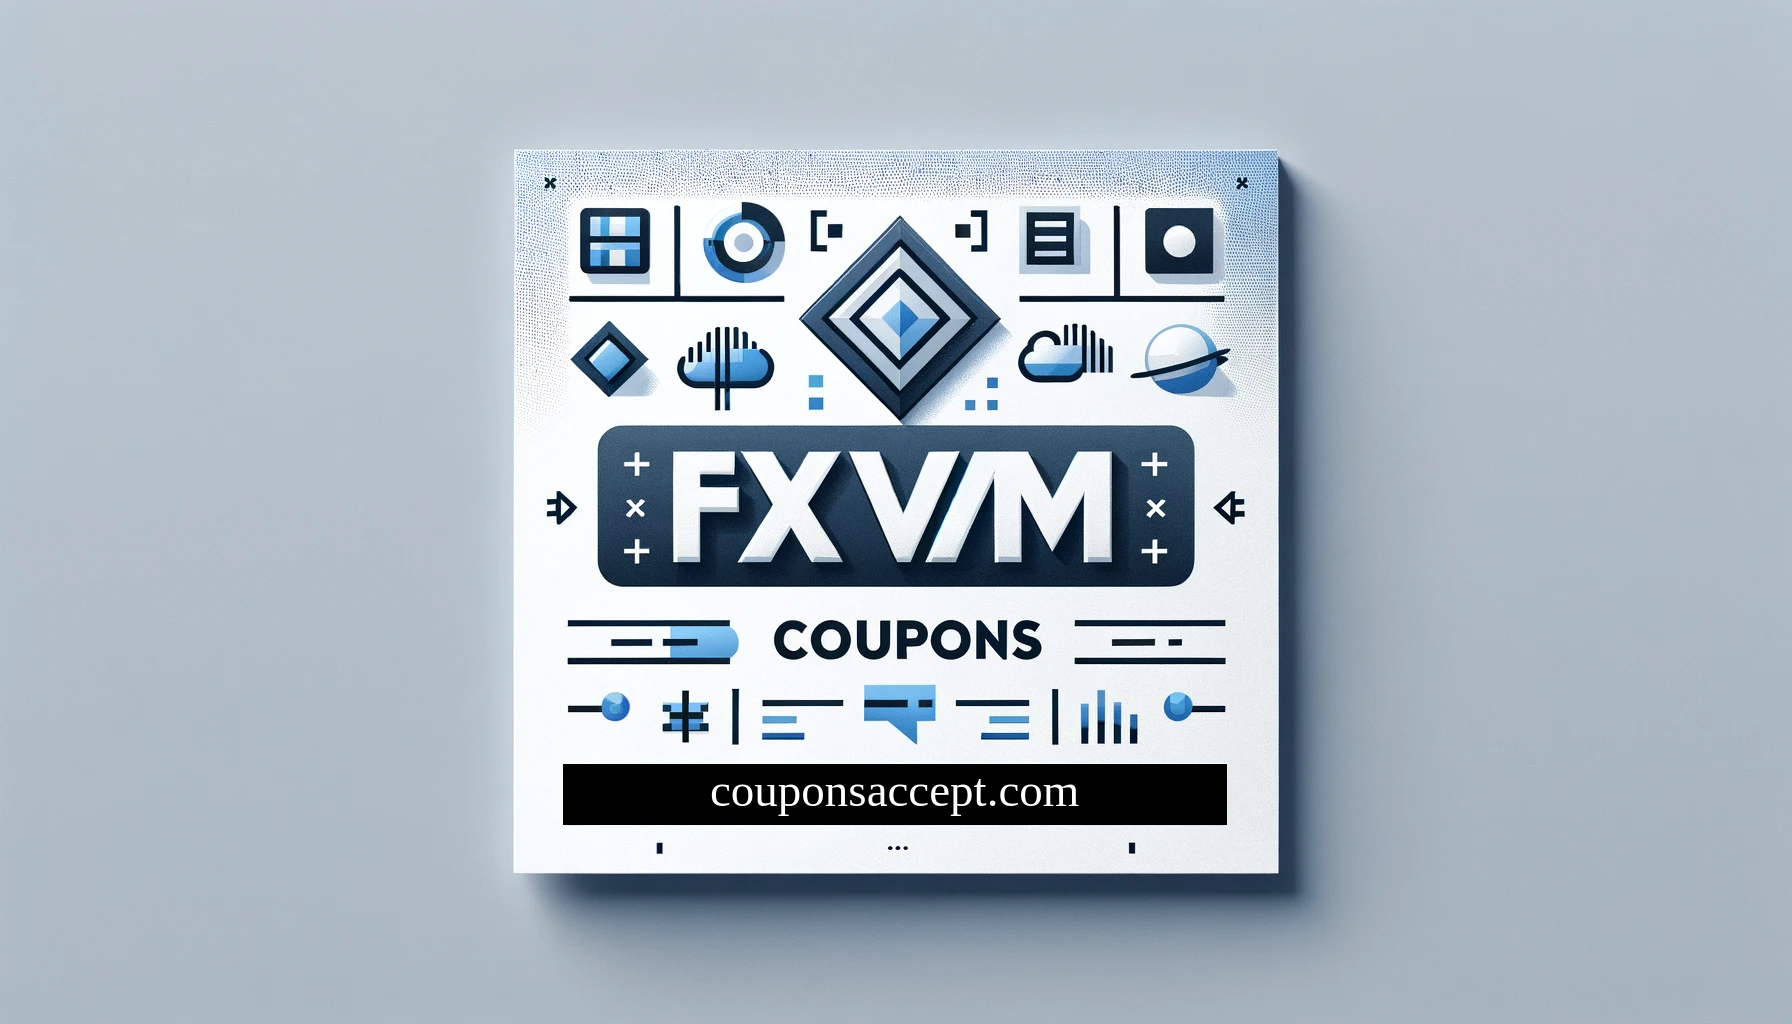 fxvm couponsaccept coupons